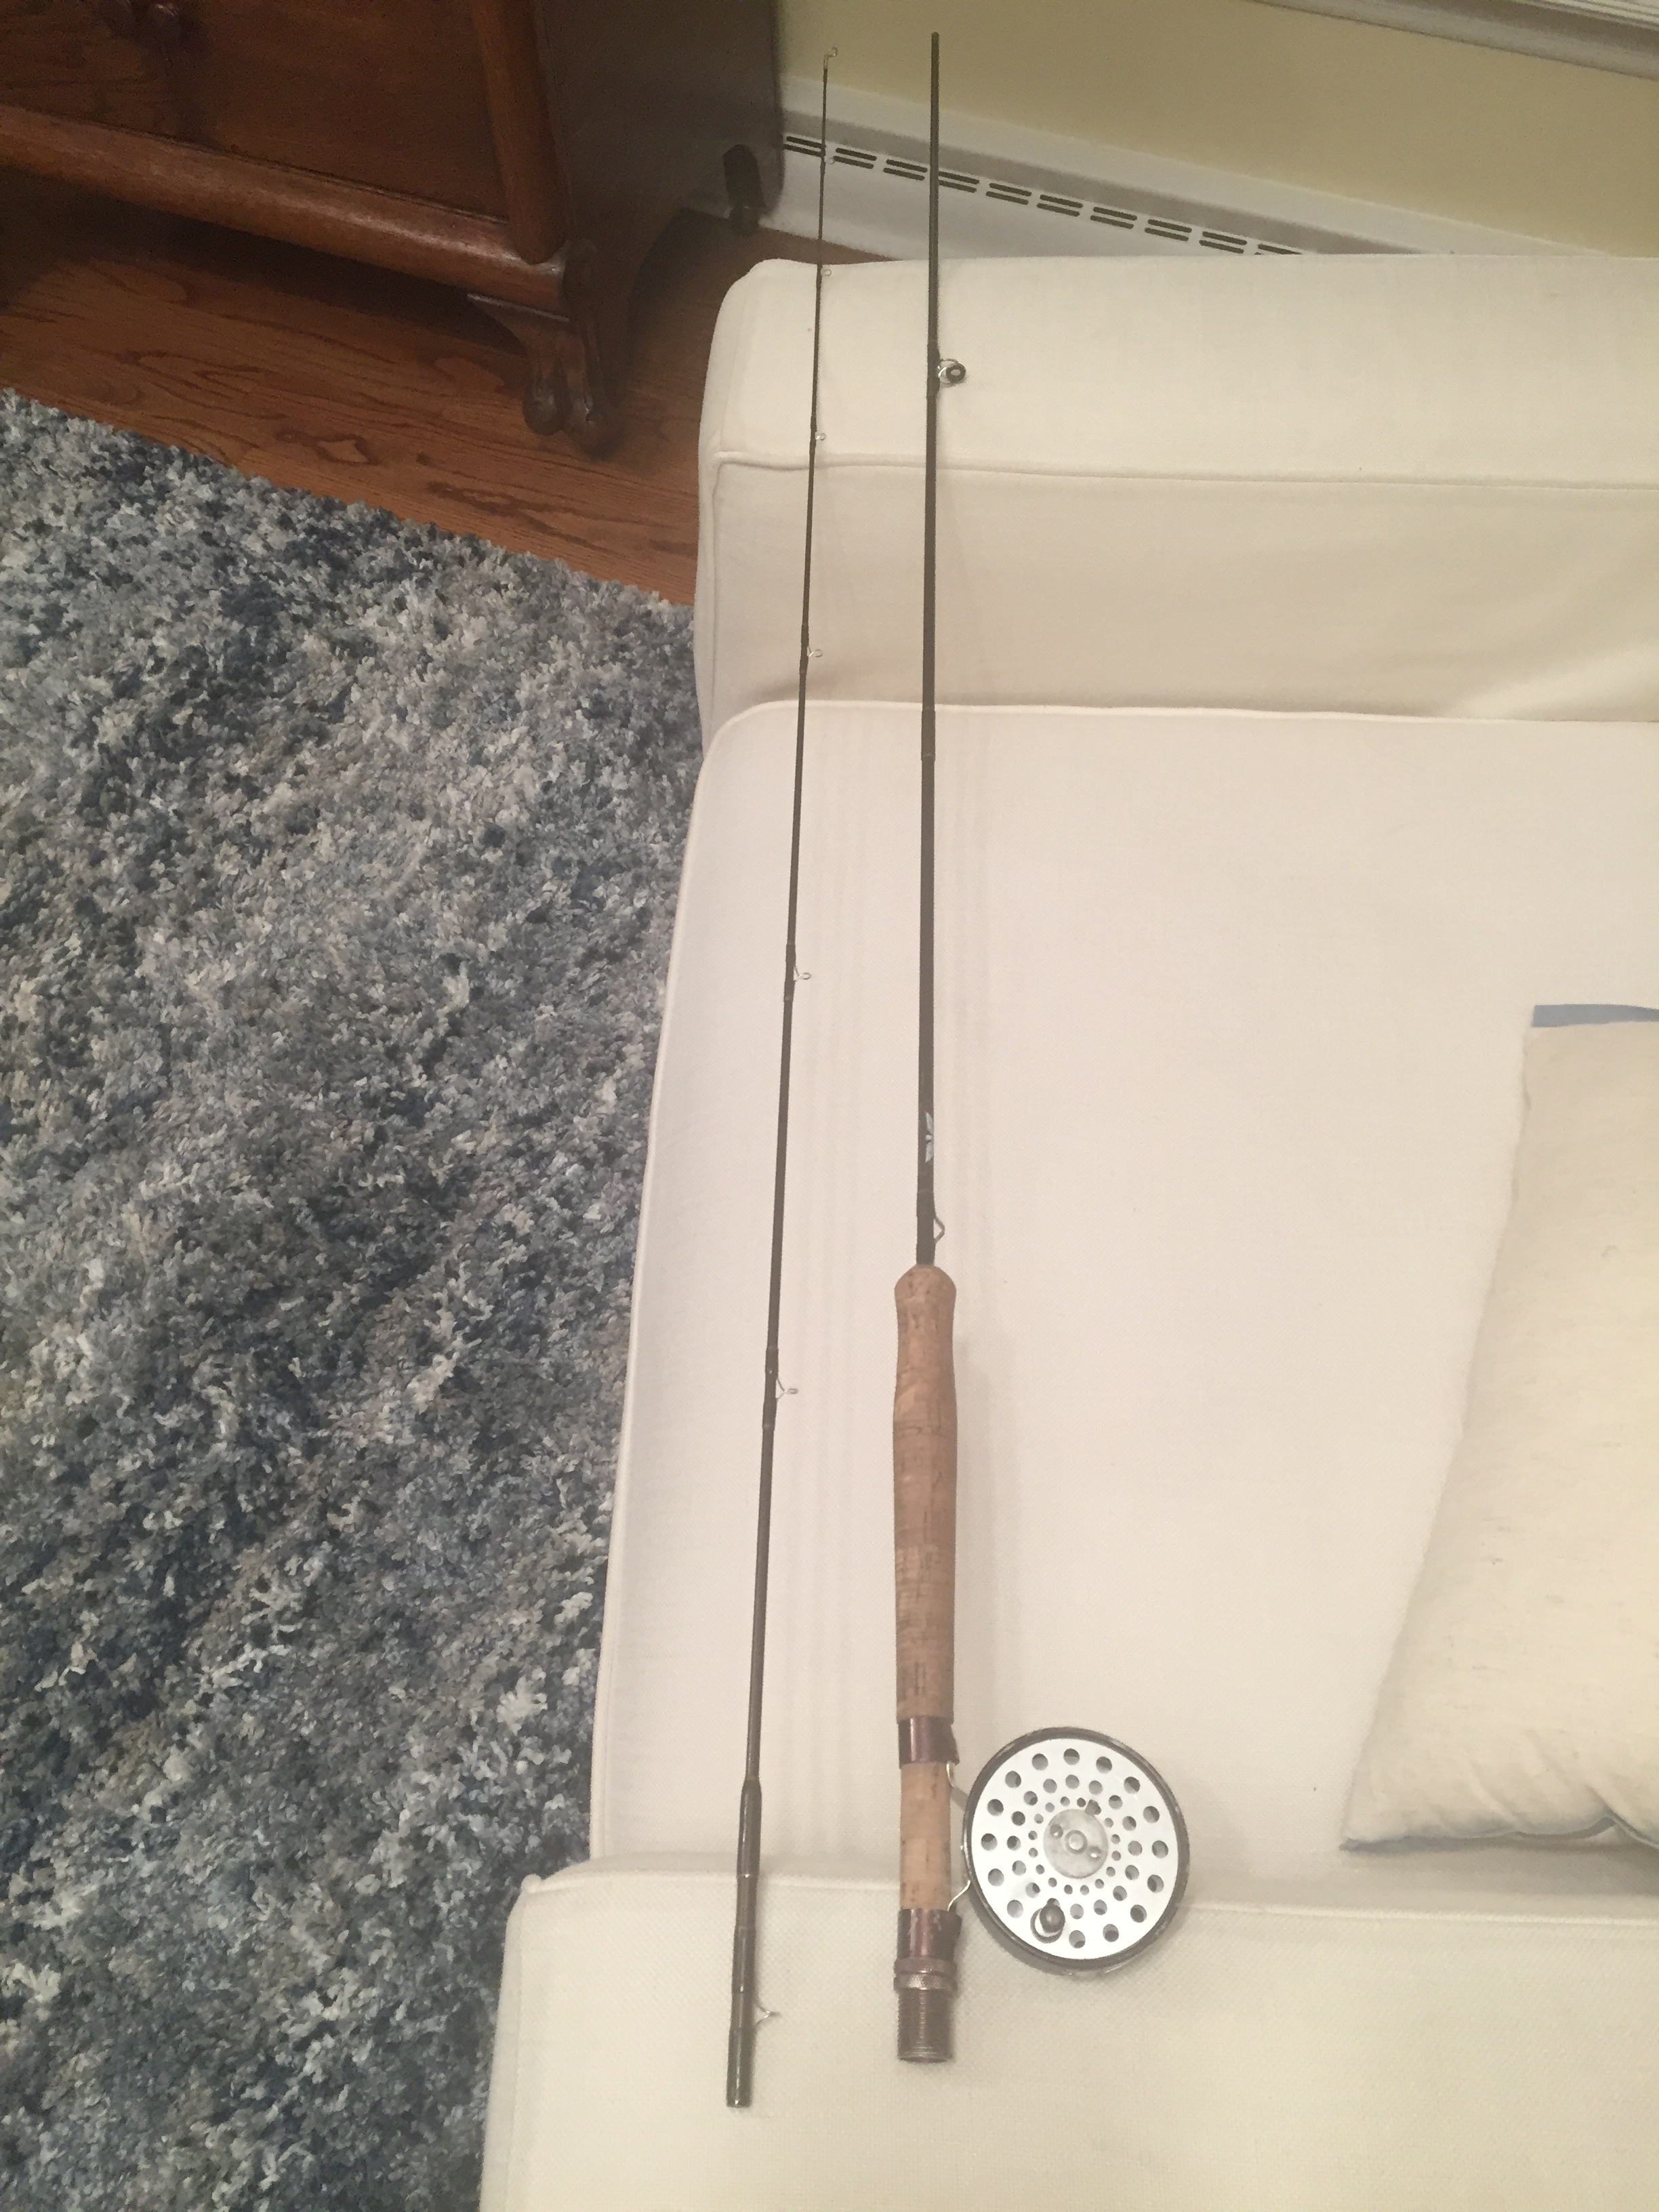 Dating Fenwick rod from serial number